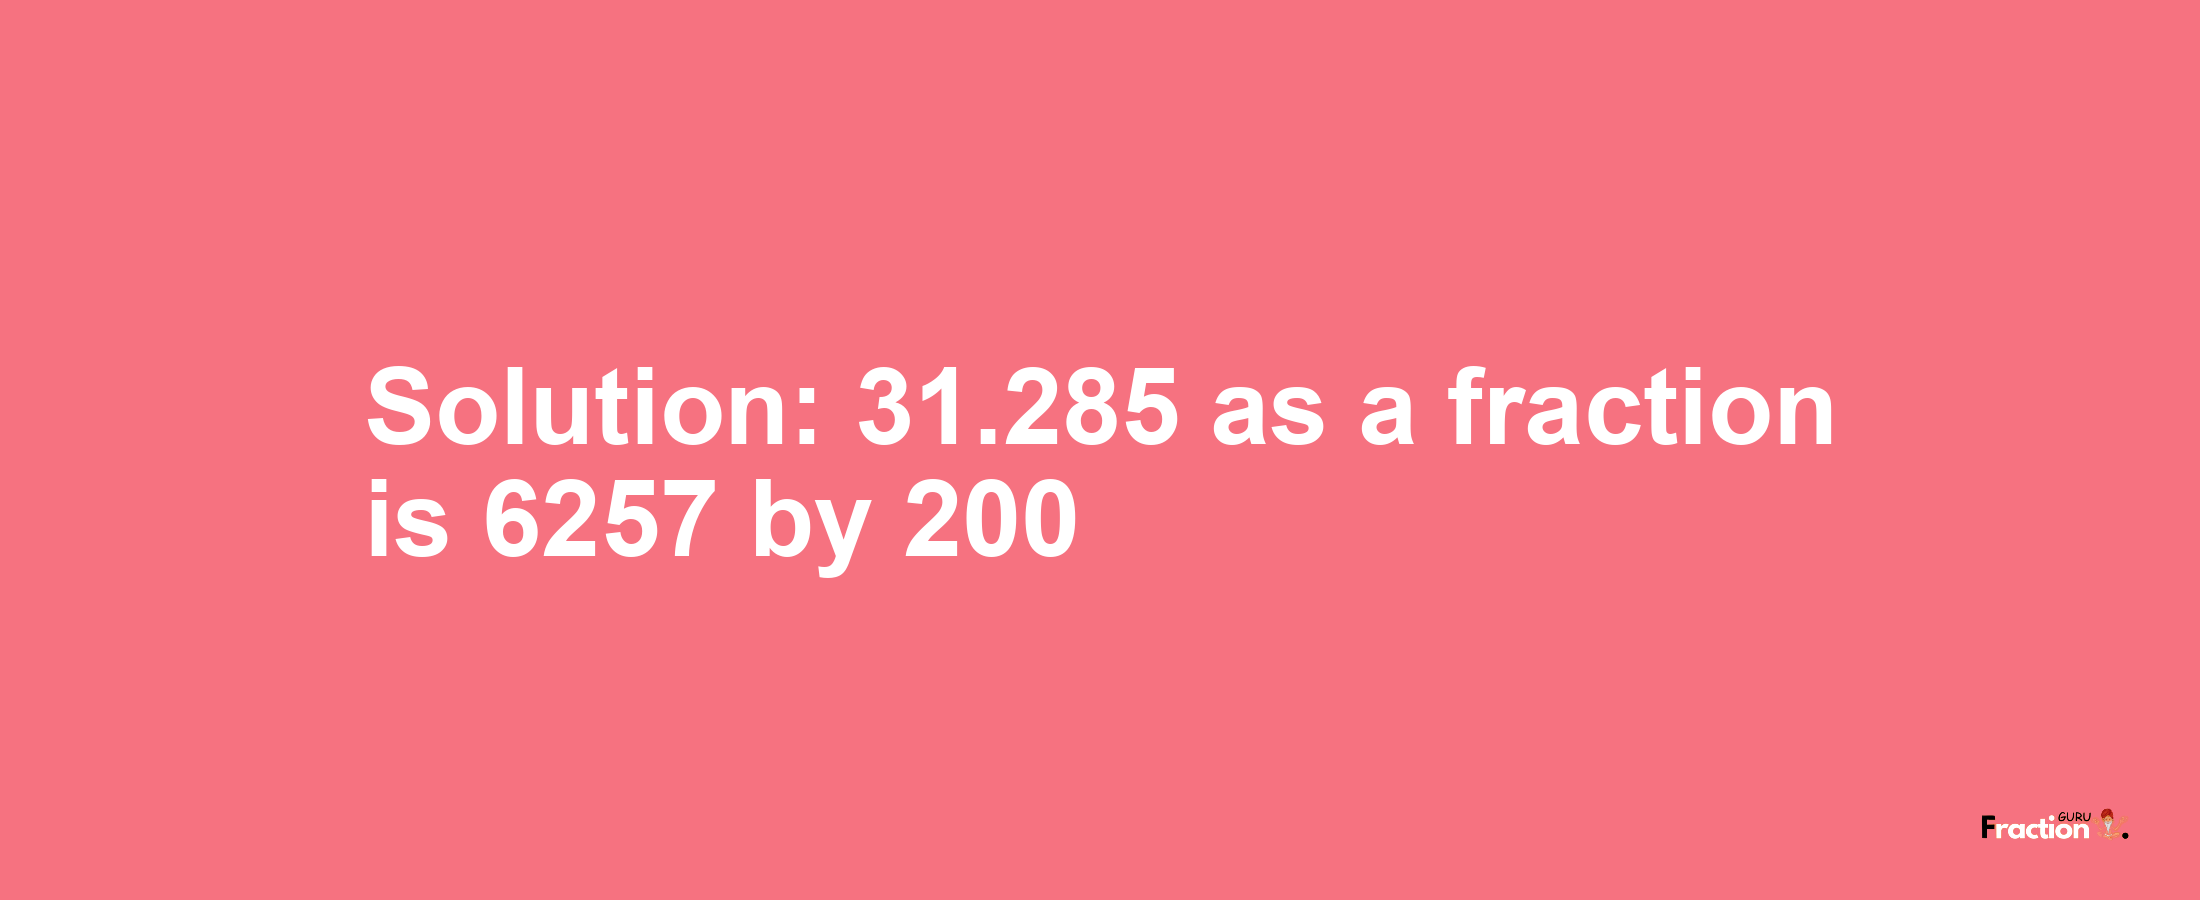 Solution:31.285 as a fraction is 6257/200